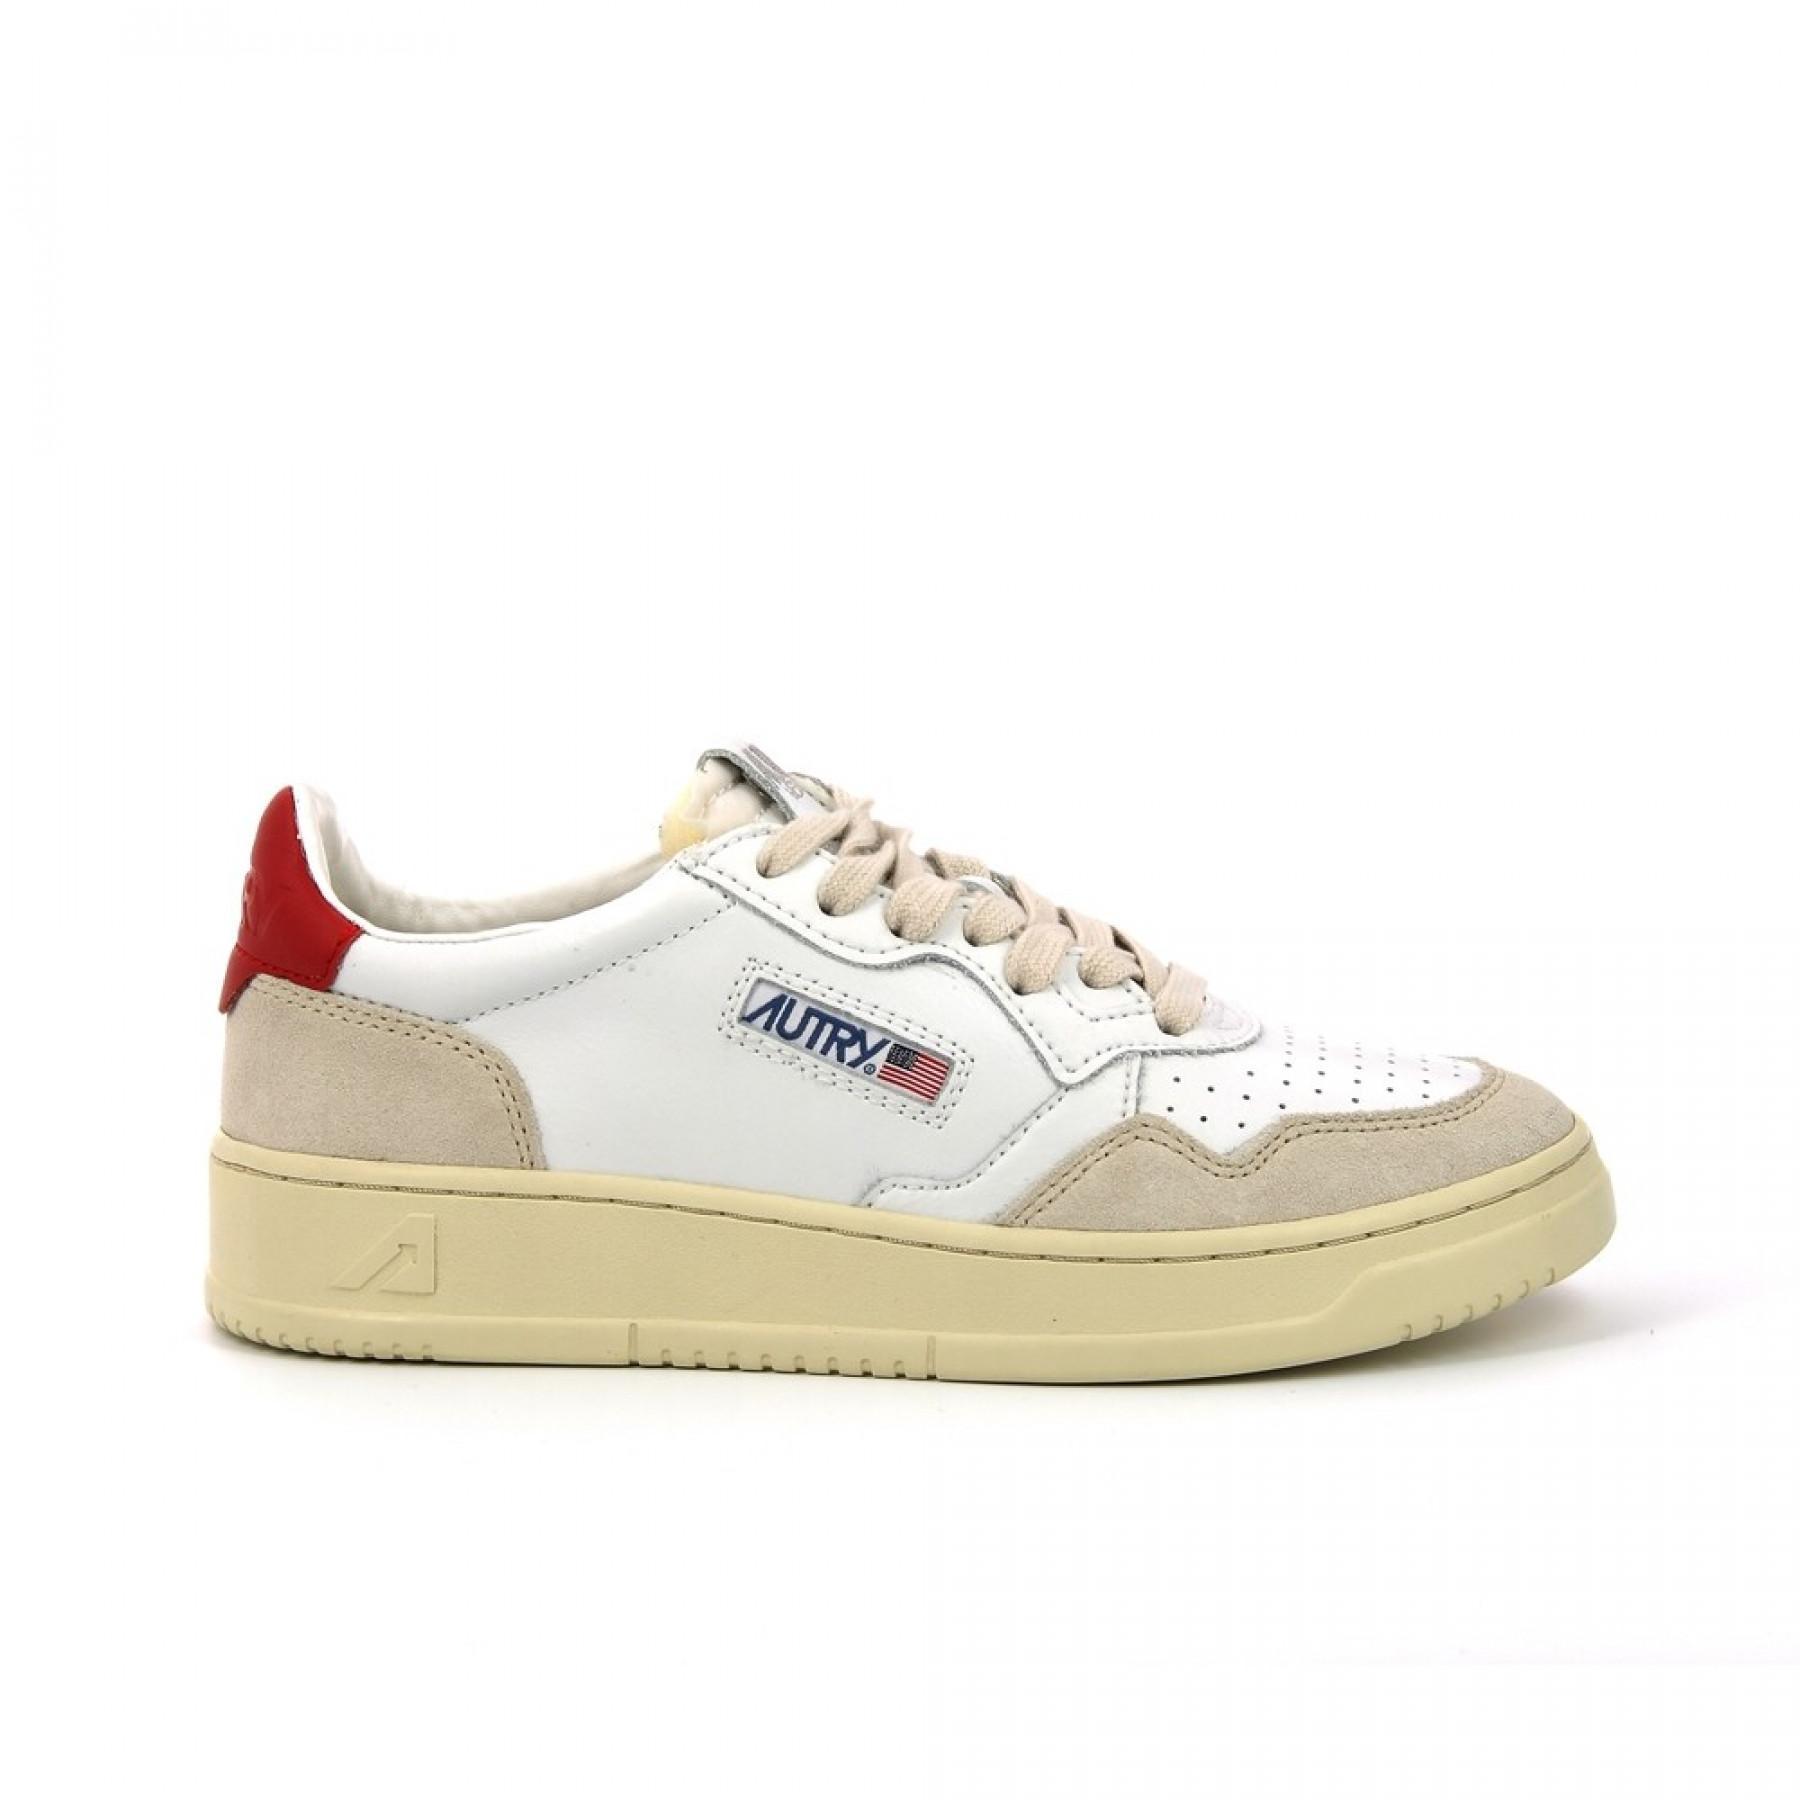 Baskets femme Autry Medalist LS24 Leather/Suede White Red